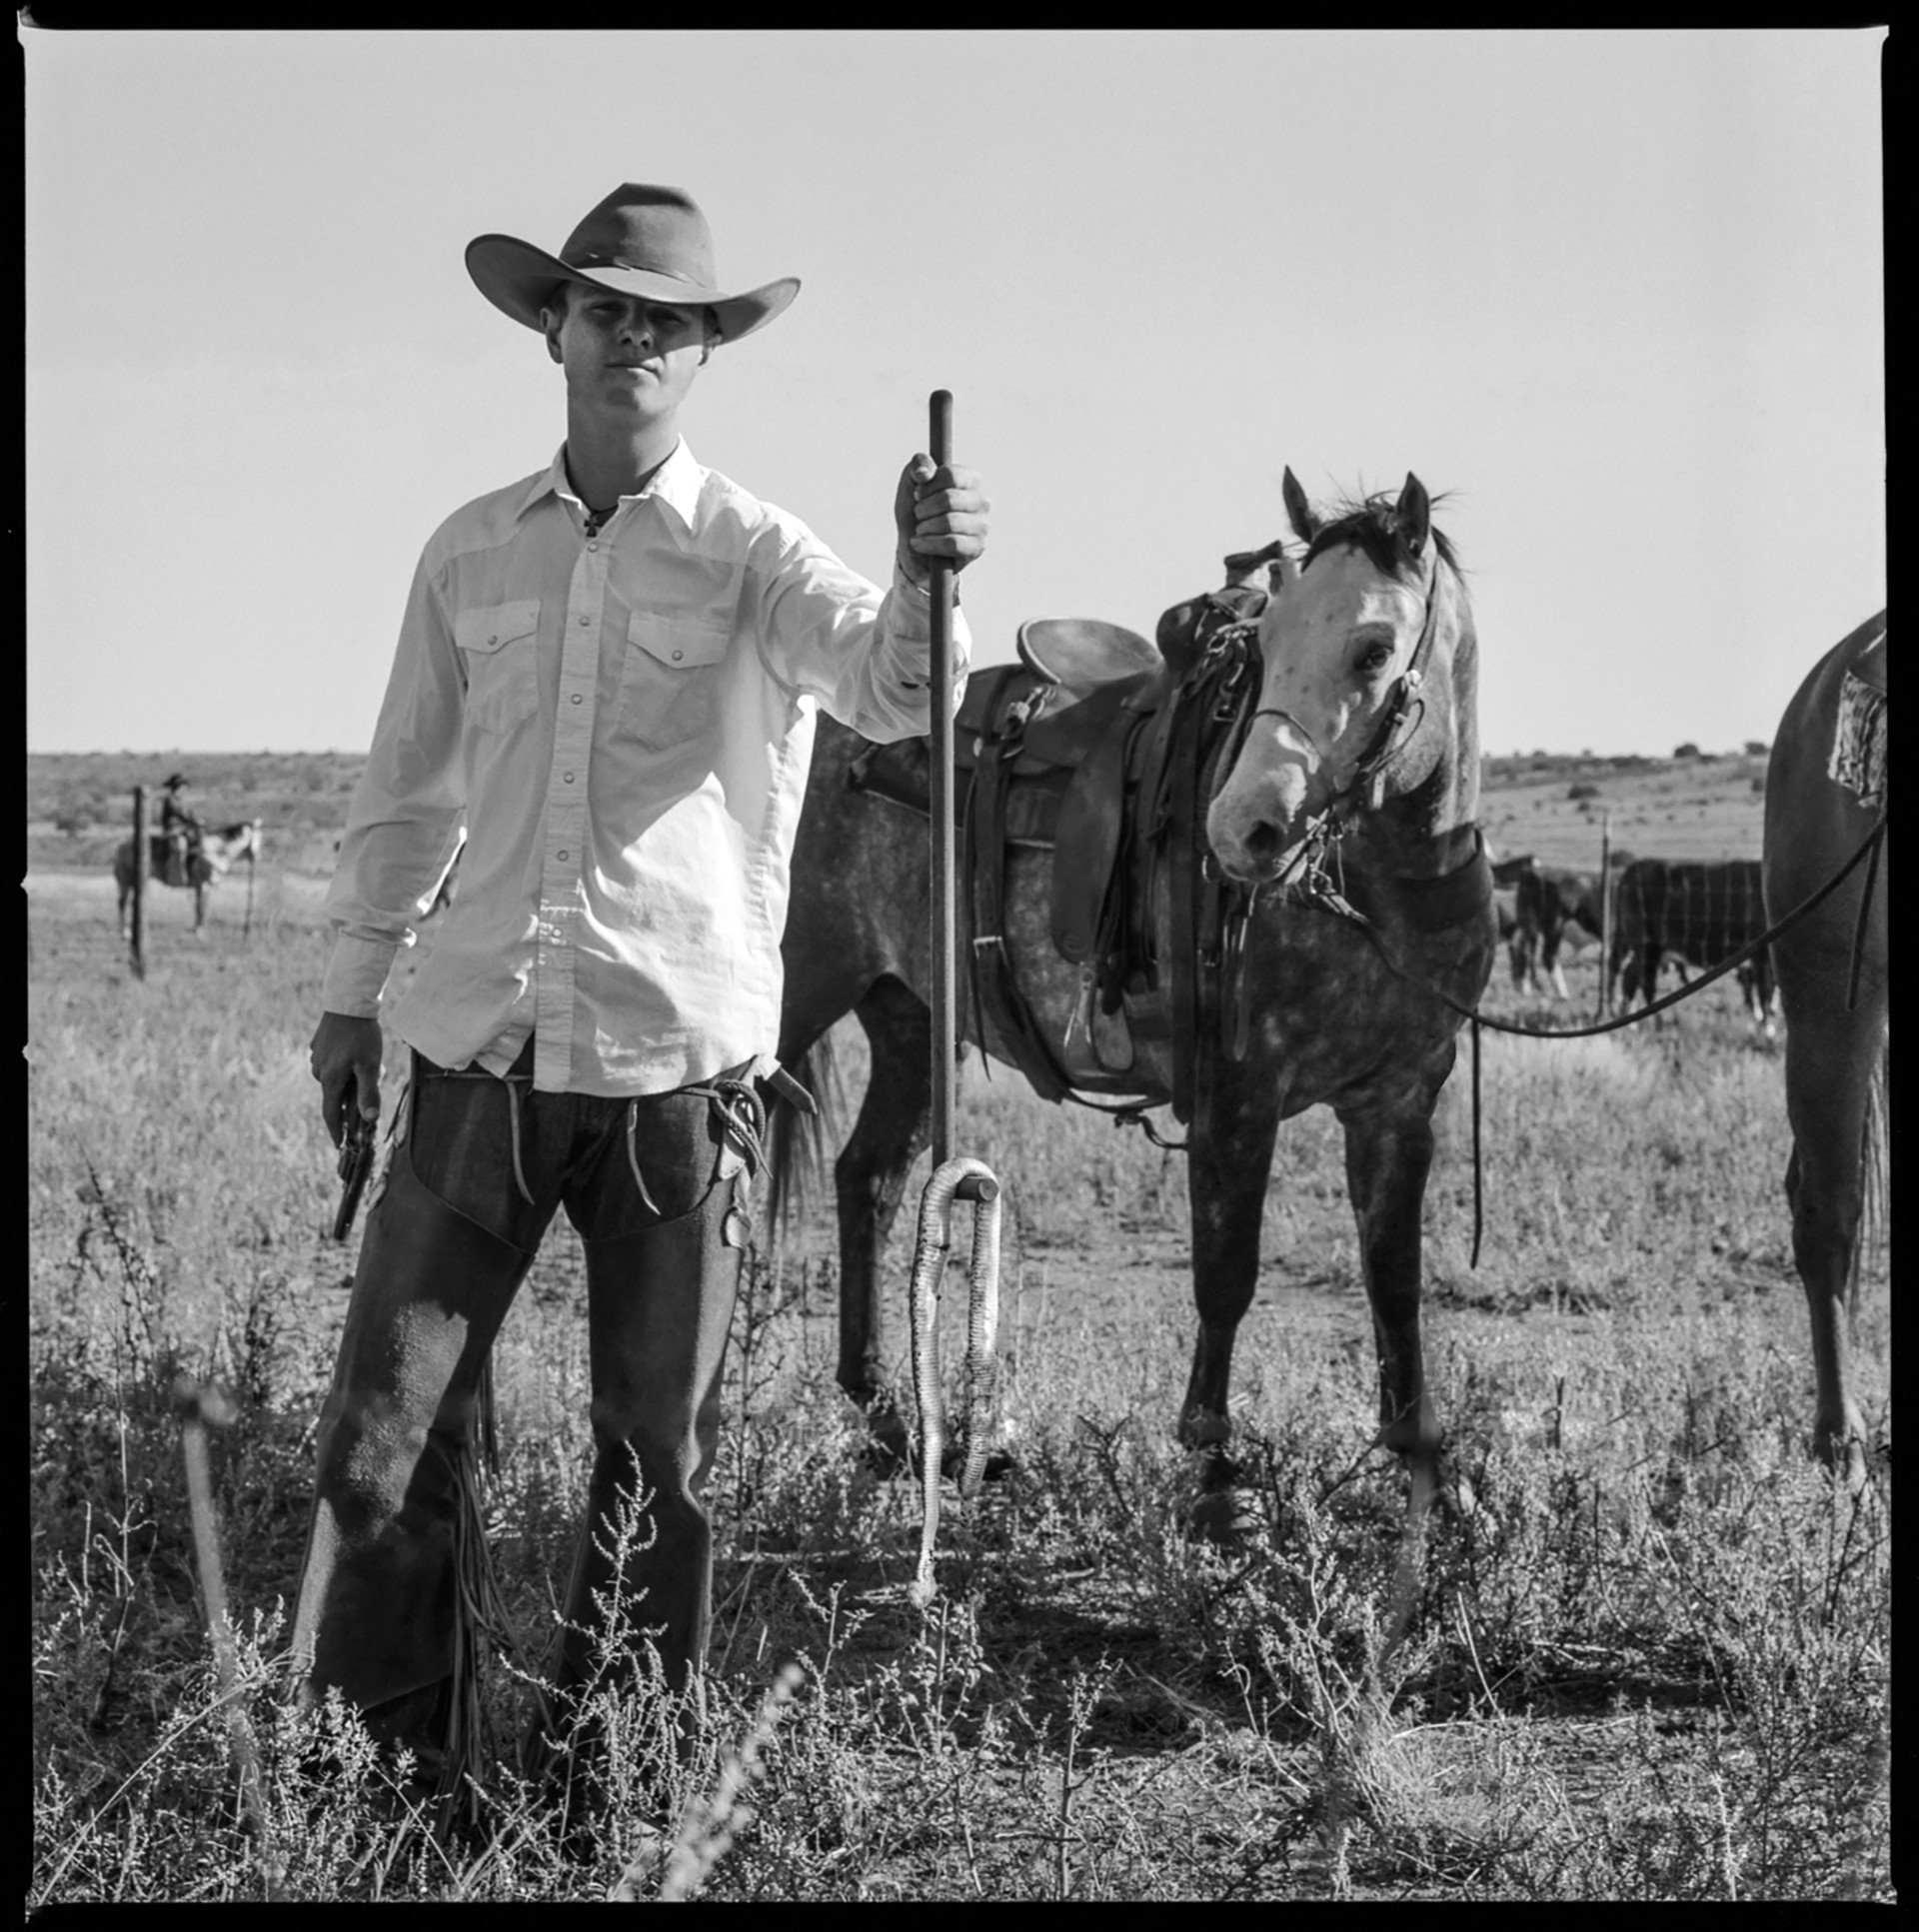 Cowboy with Rattlesnake - Ft. Davis, Texas by Kevin Greenblat